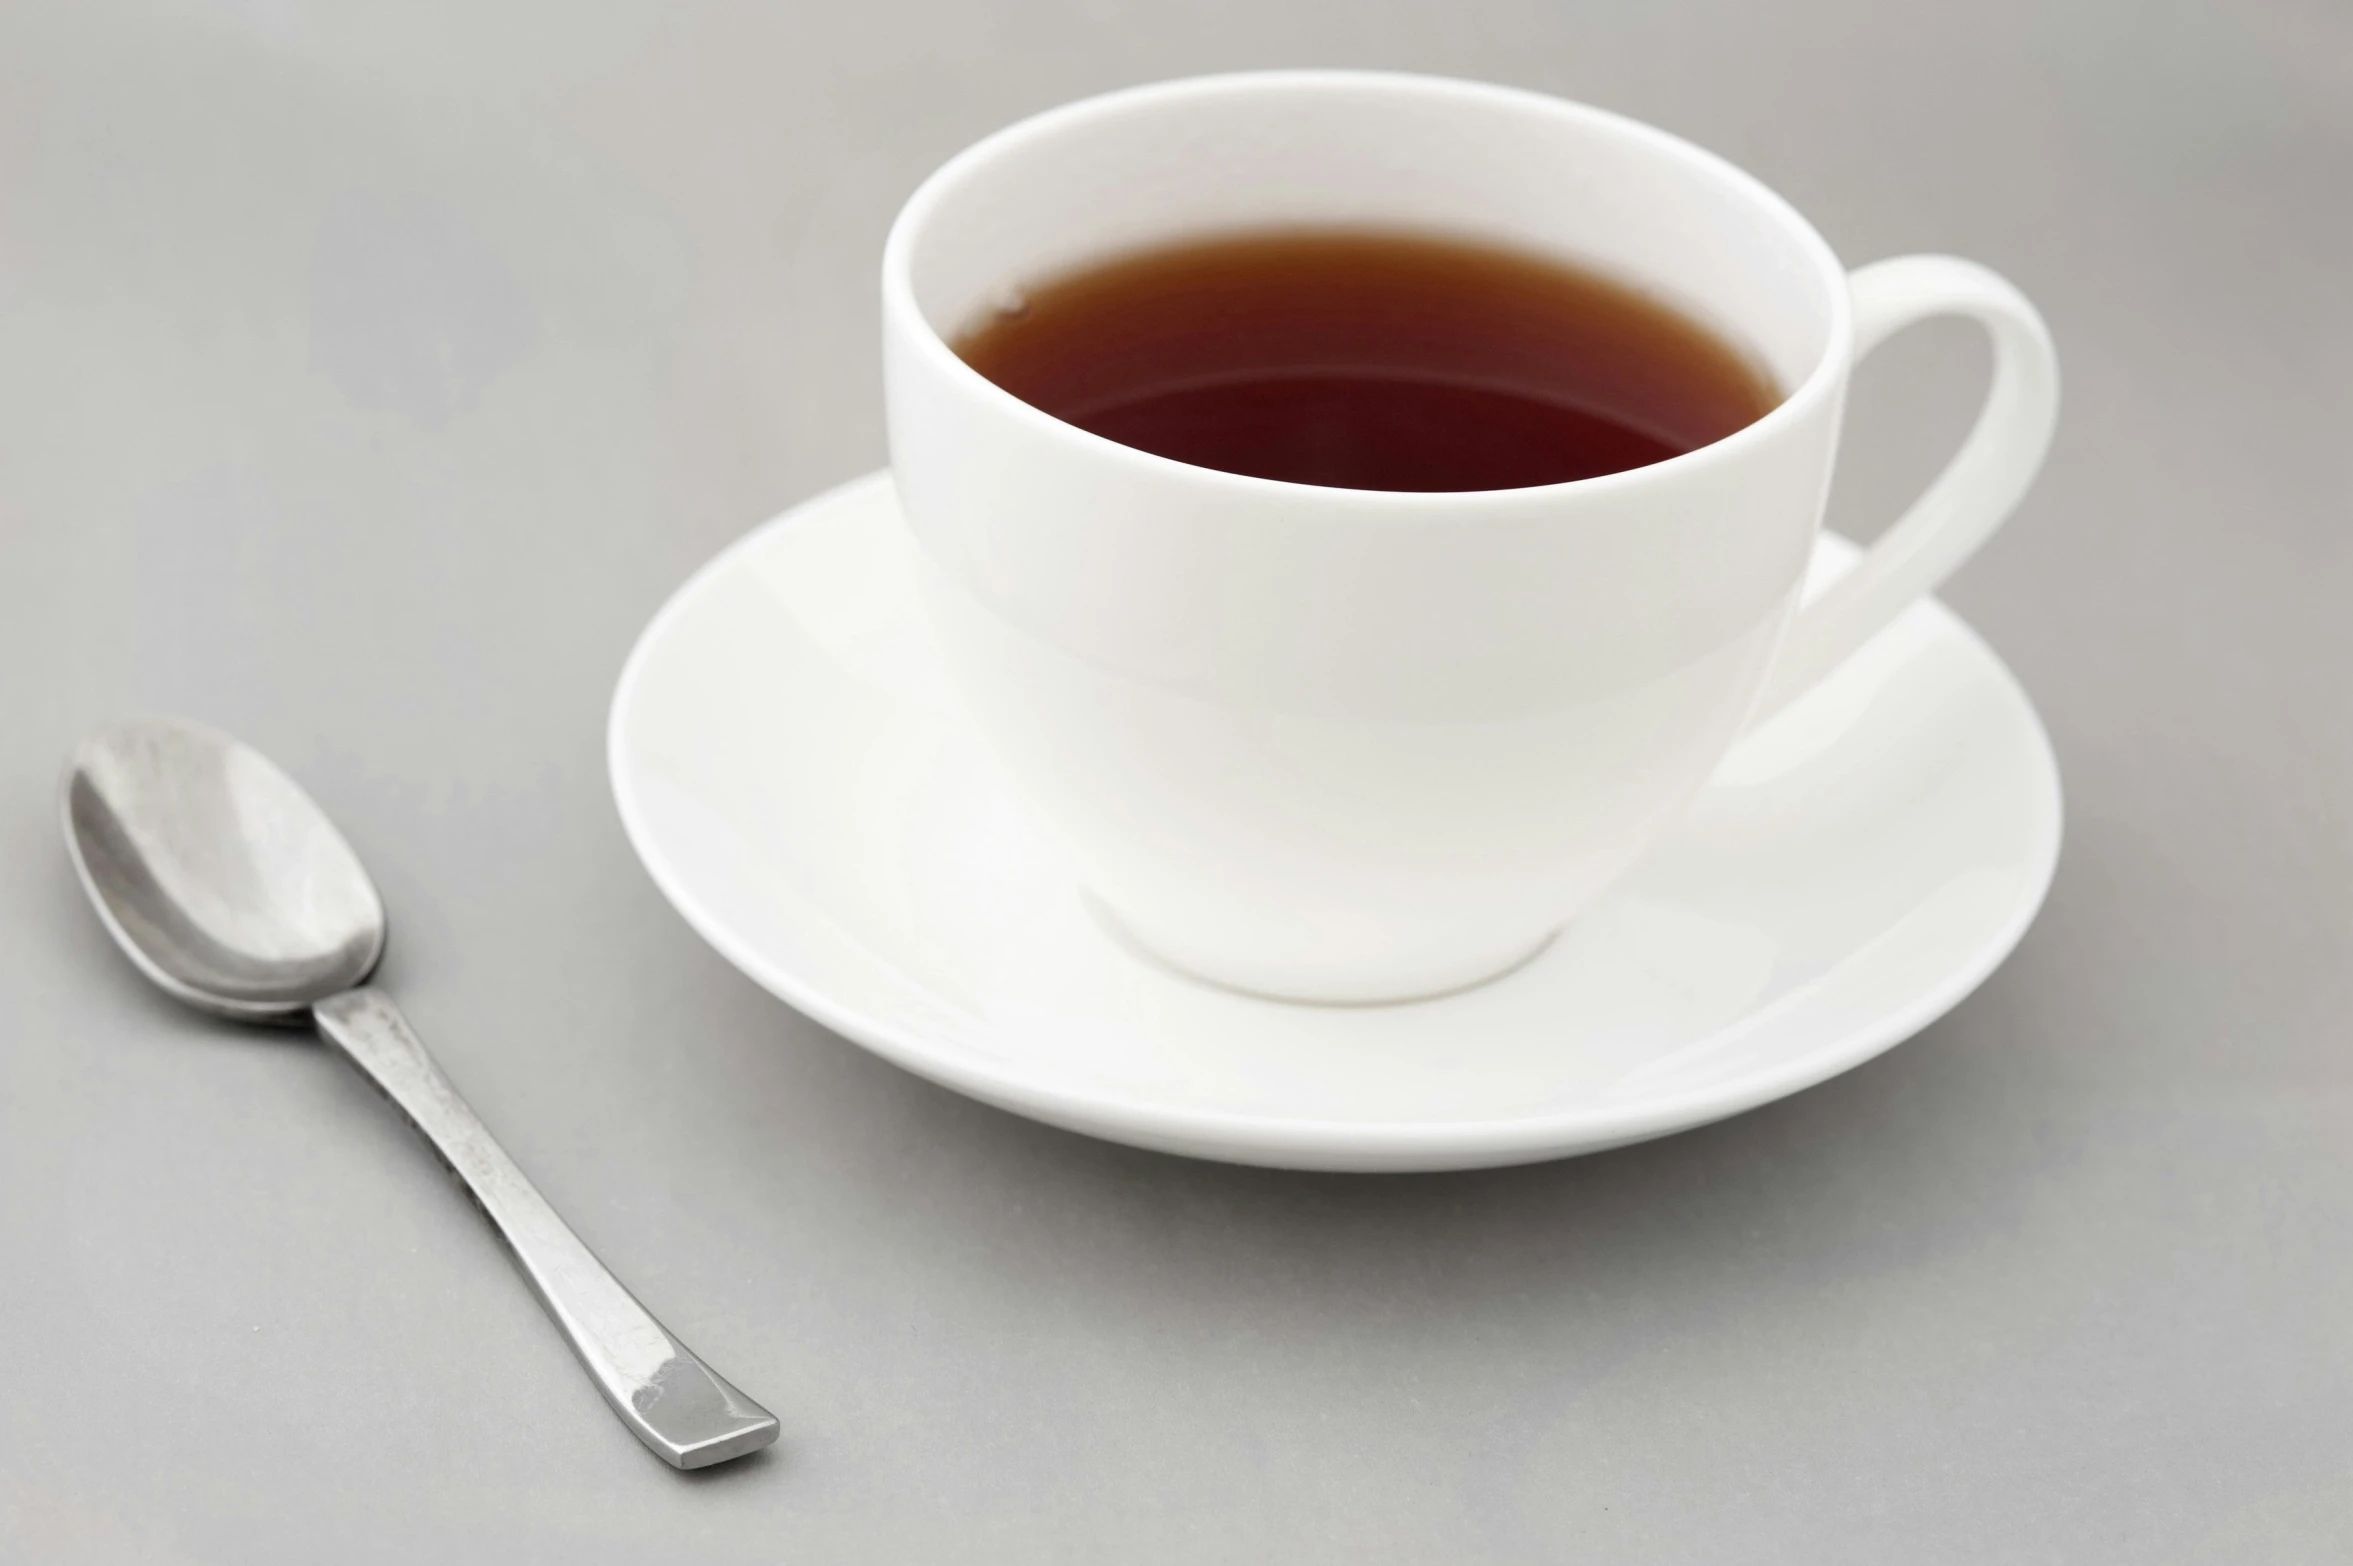 a small cup on a saucer with a spoon